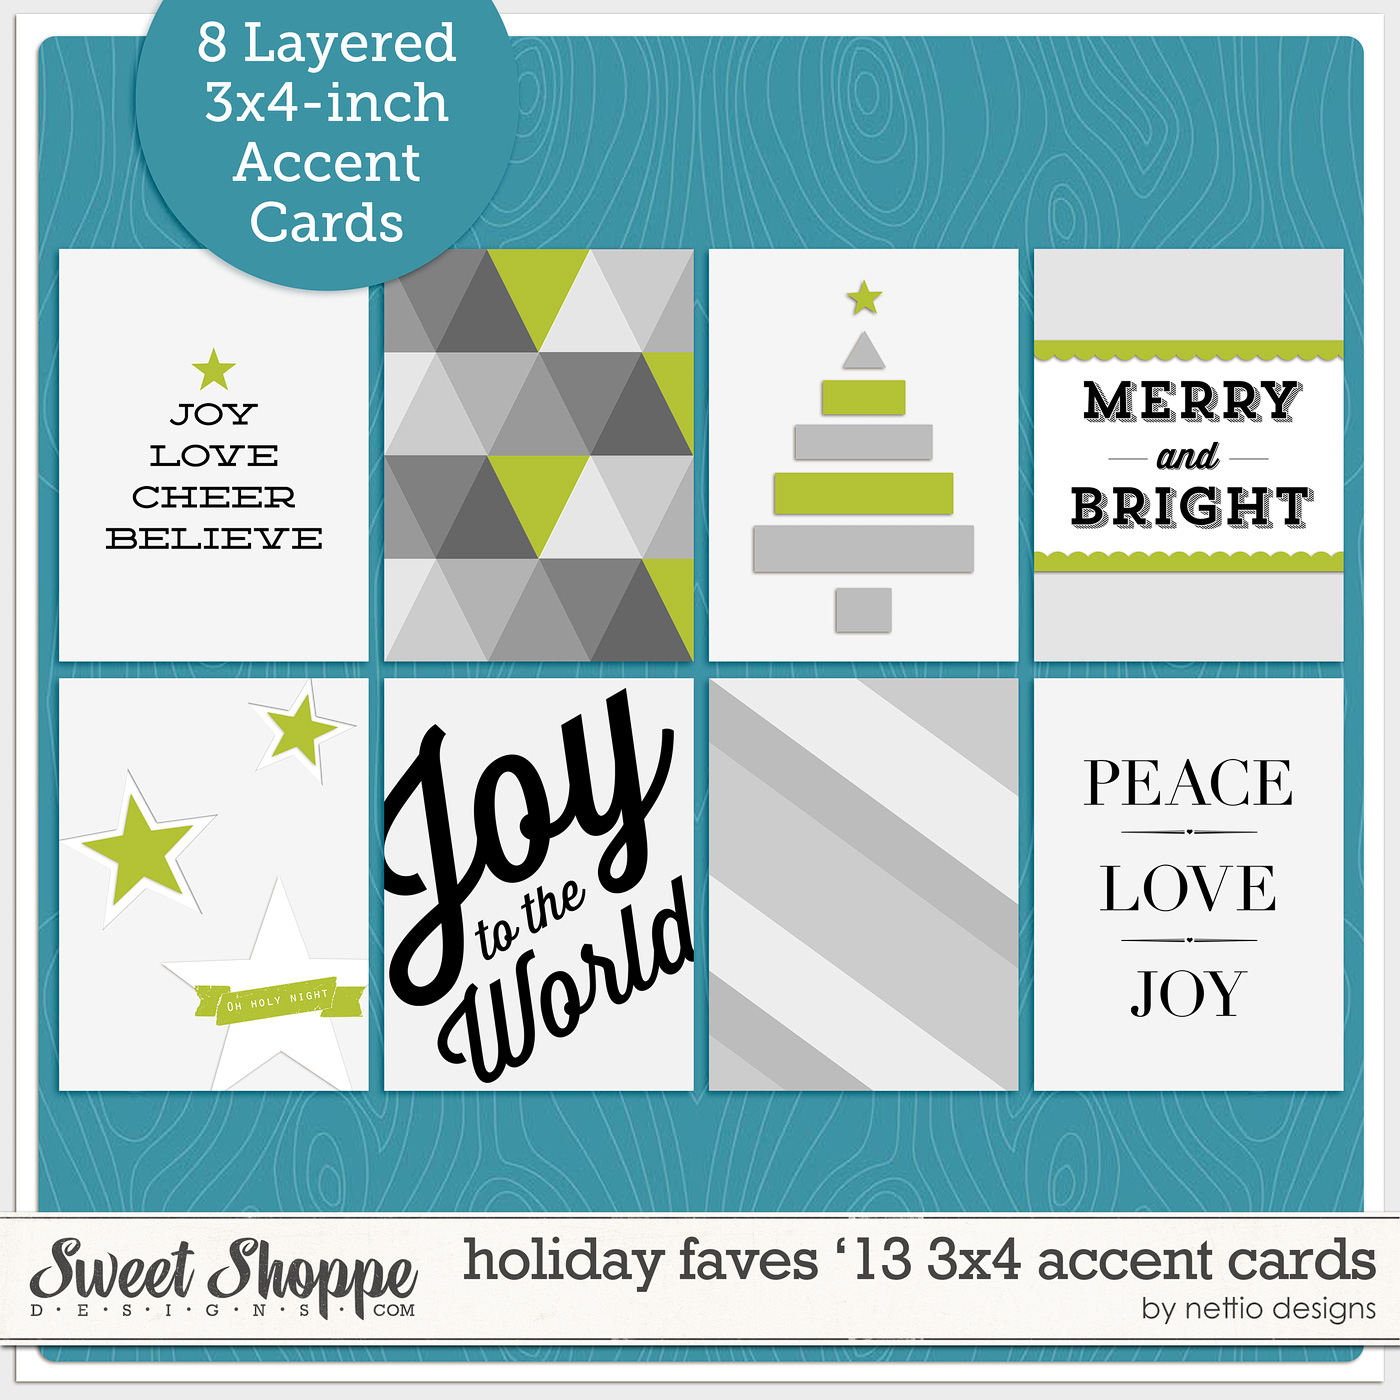 nettiodesigns_HolidayFaves13-3x4Cards-prev-1400